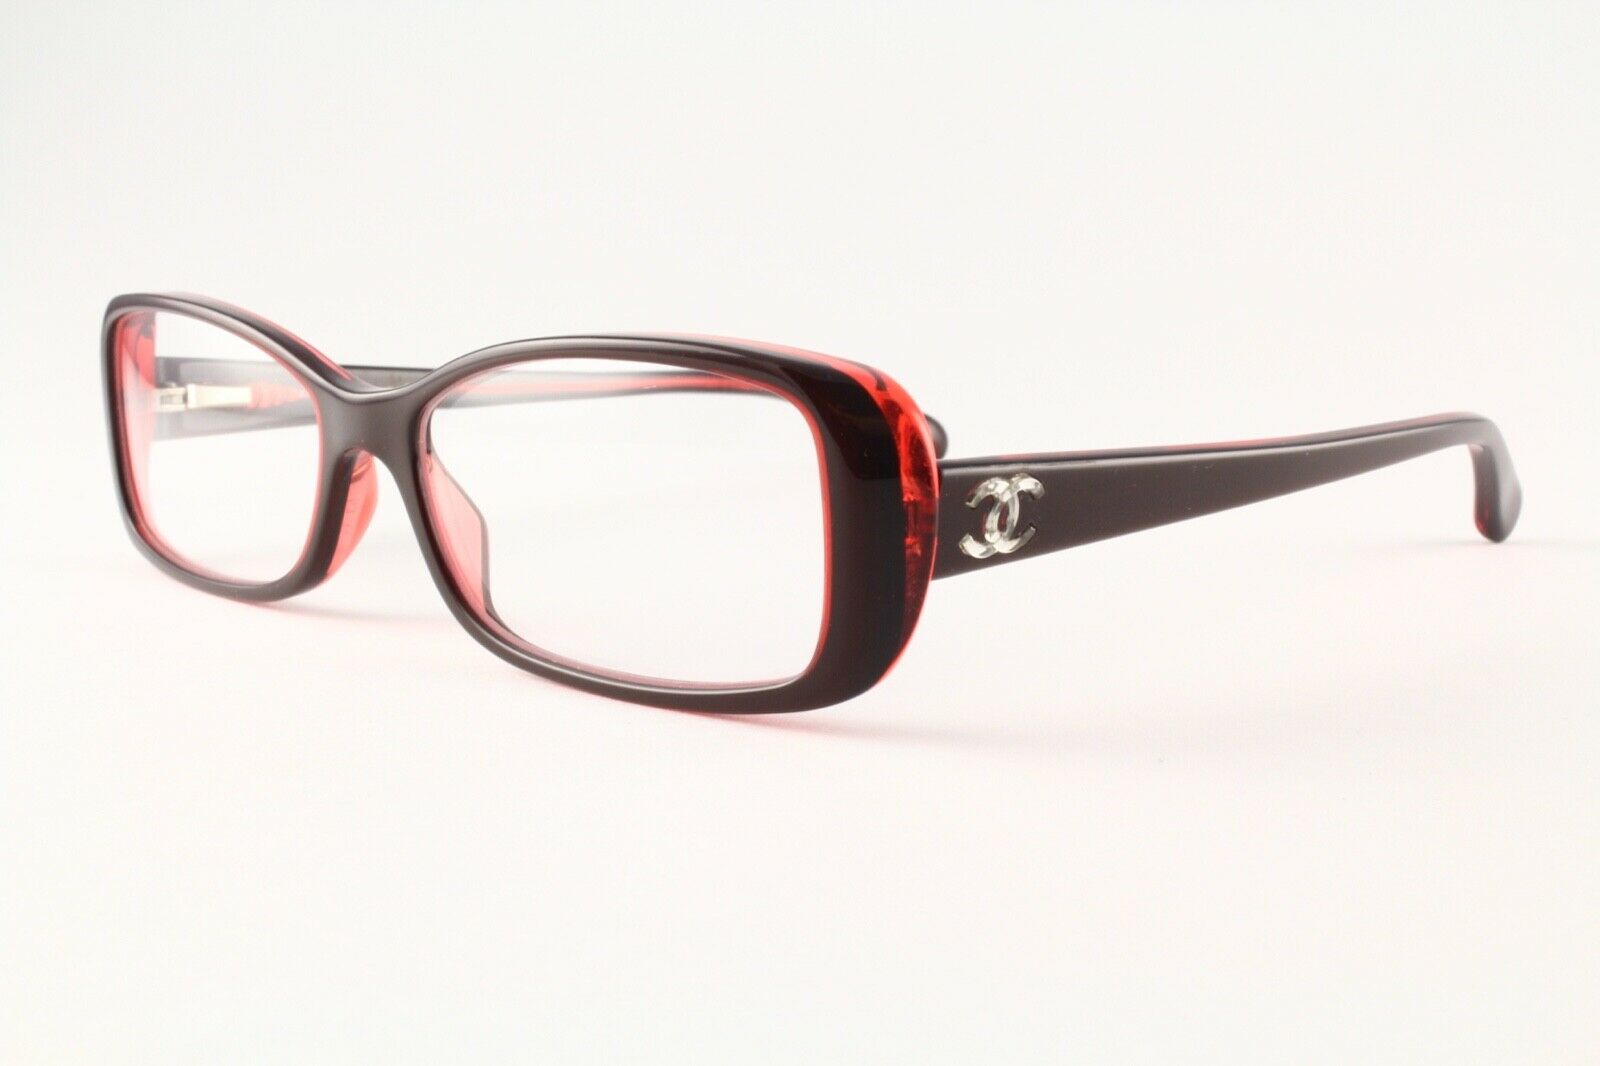  clear lens / dark red